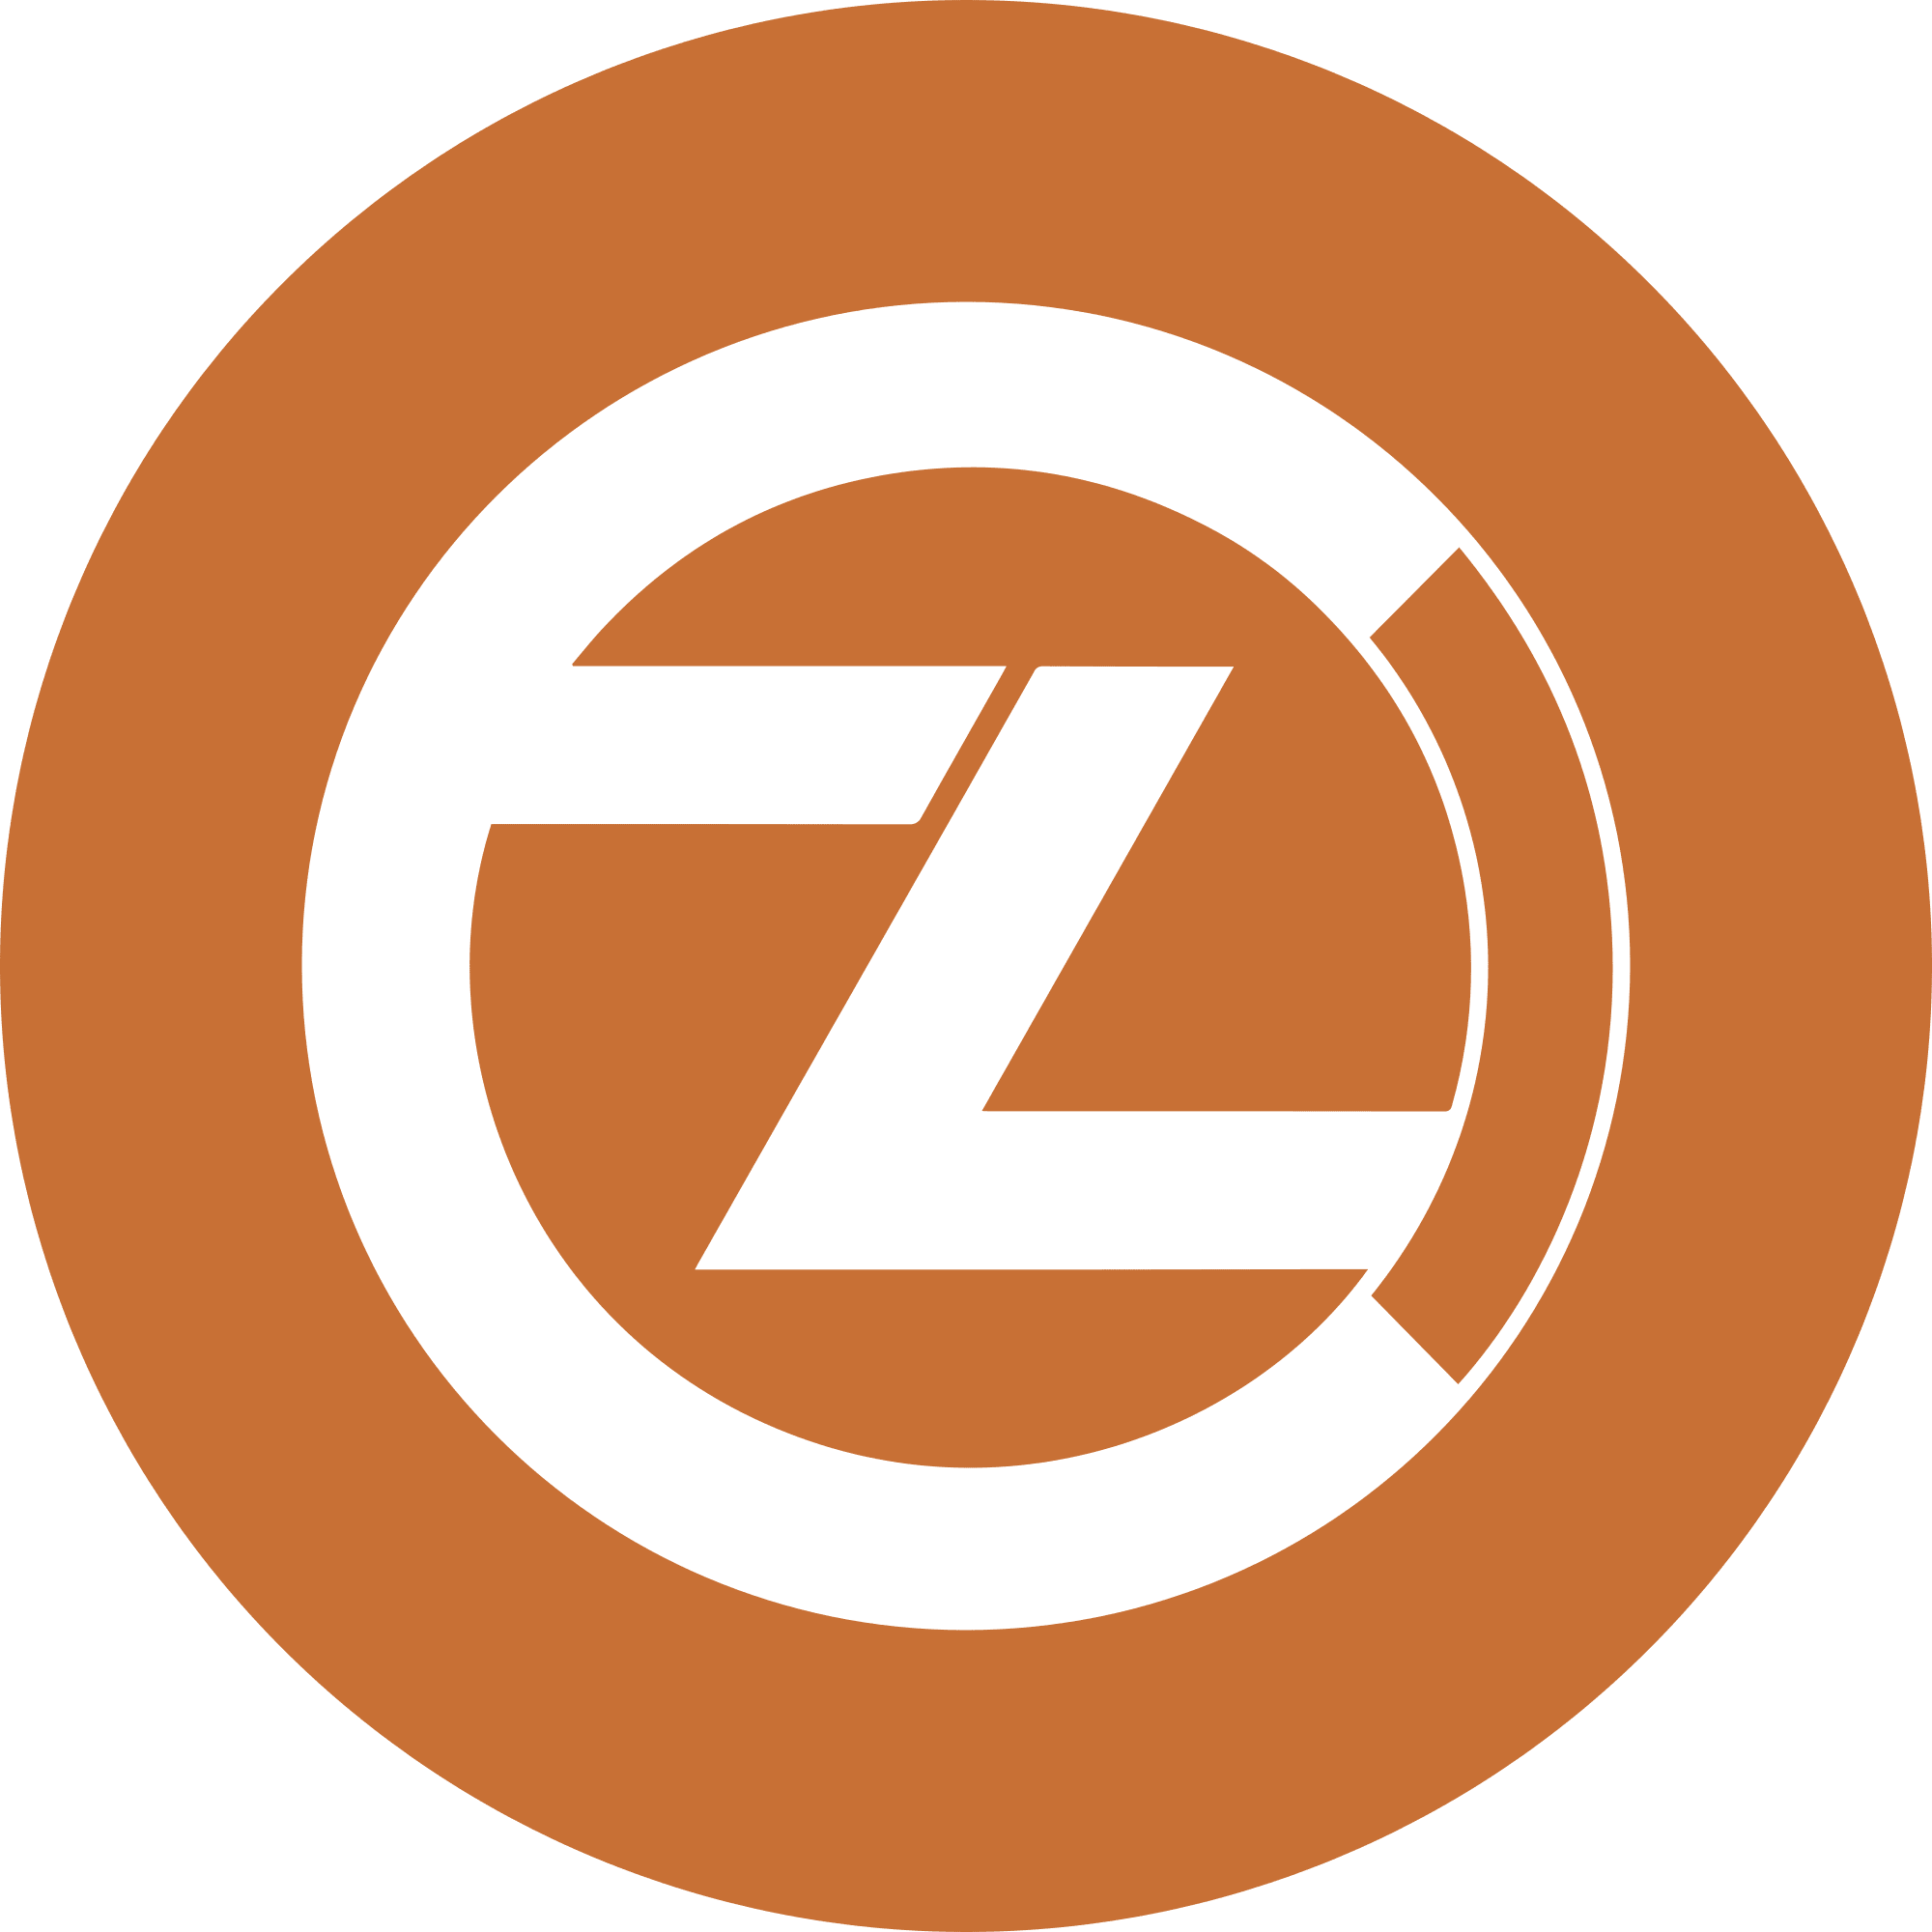 ZClassic logo in png format